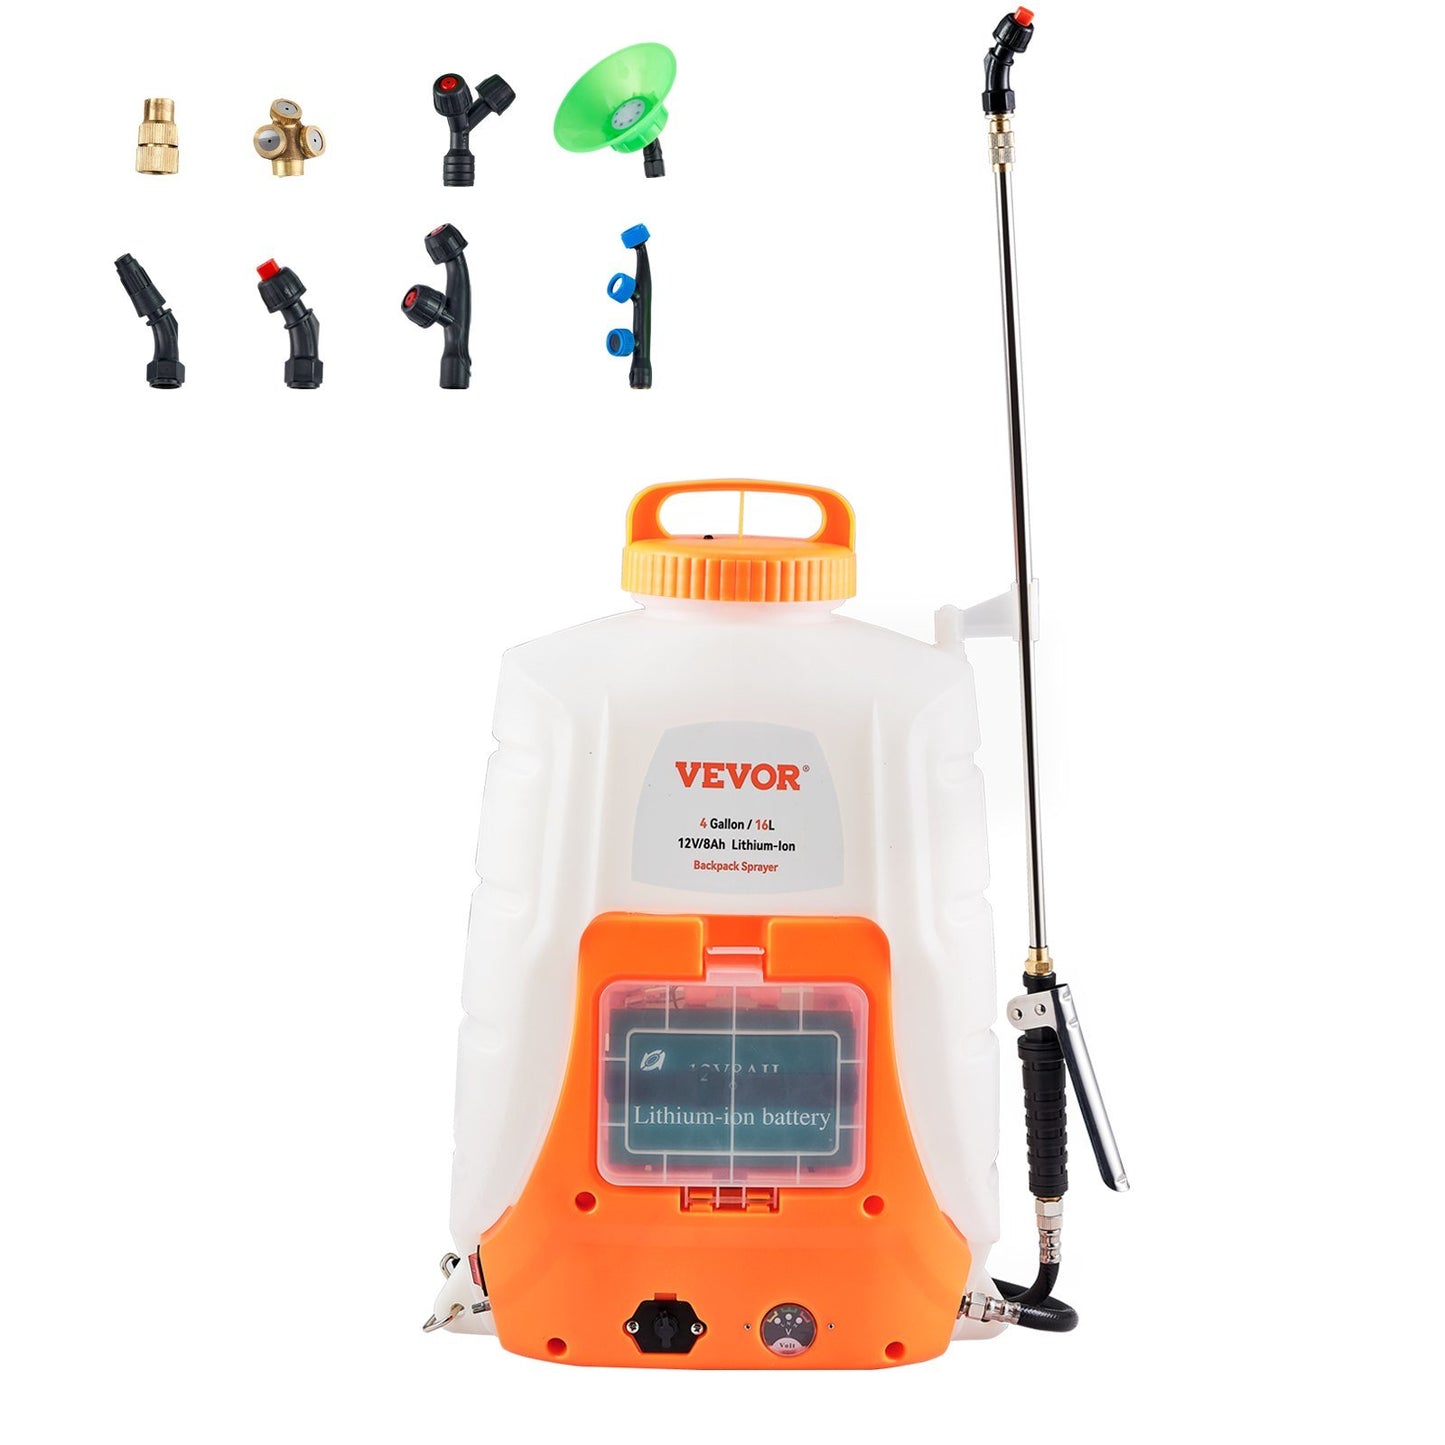 VEVOR Battery Powered Backpack Sprayer ; 4 Gal Tank; 0-90 PSI Adjustable Pressure; Back Pack Sprayer with 8 Nozzles and 2 Wands; 12V 8Ah Battery; Wide Mouth Lid for Weeding; Spraying; Cleaning